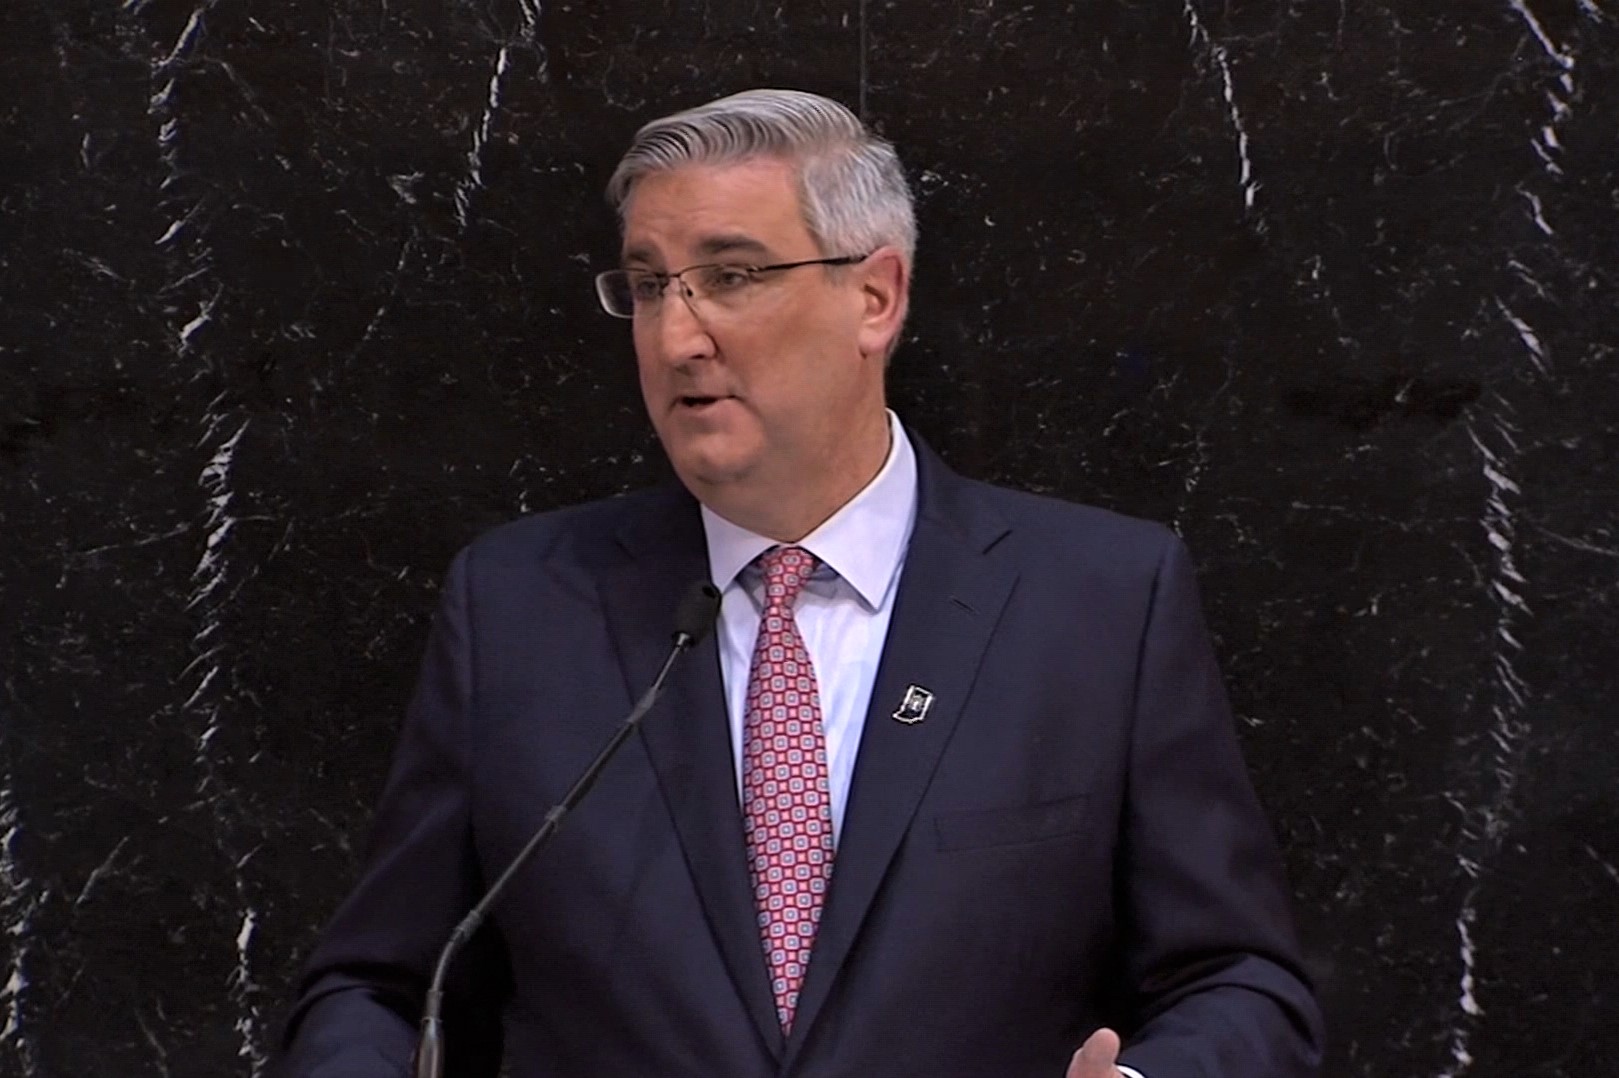 Gov. Eric Holcomb speaks during the 2019 State of the State Address.